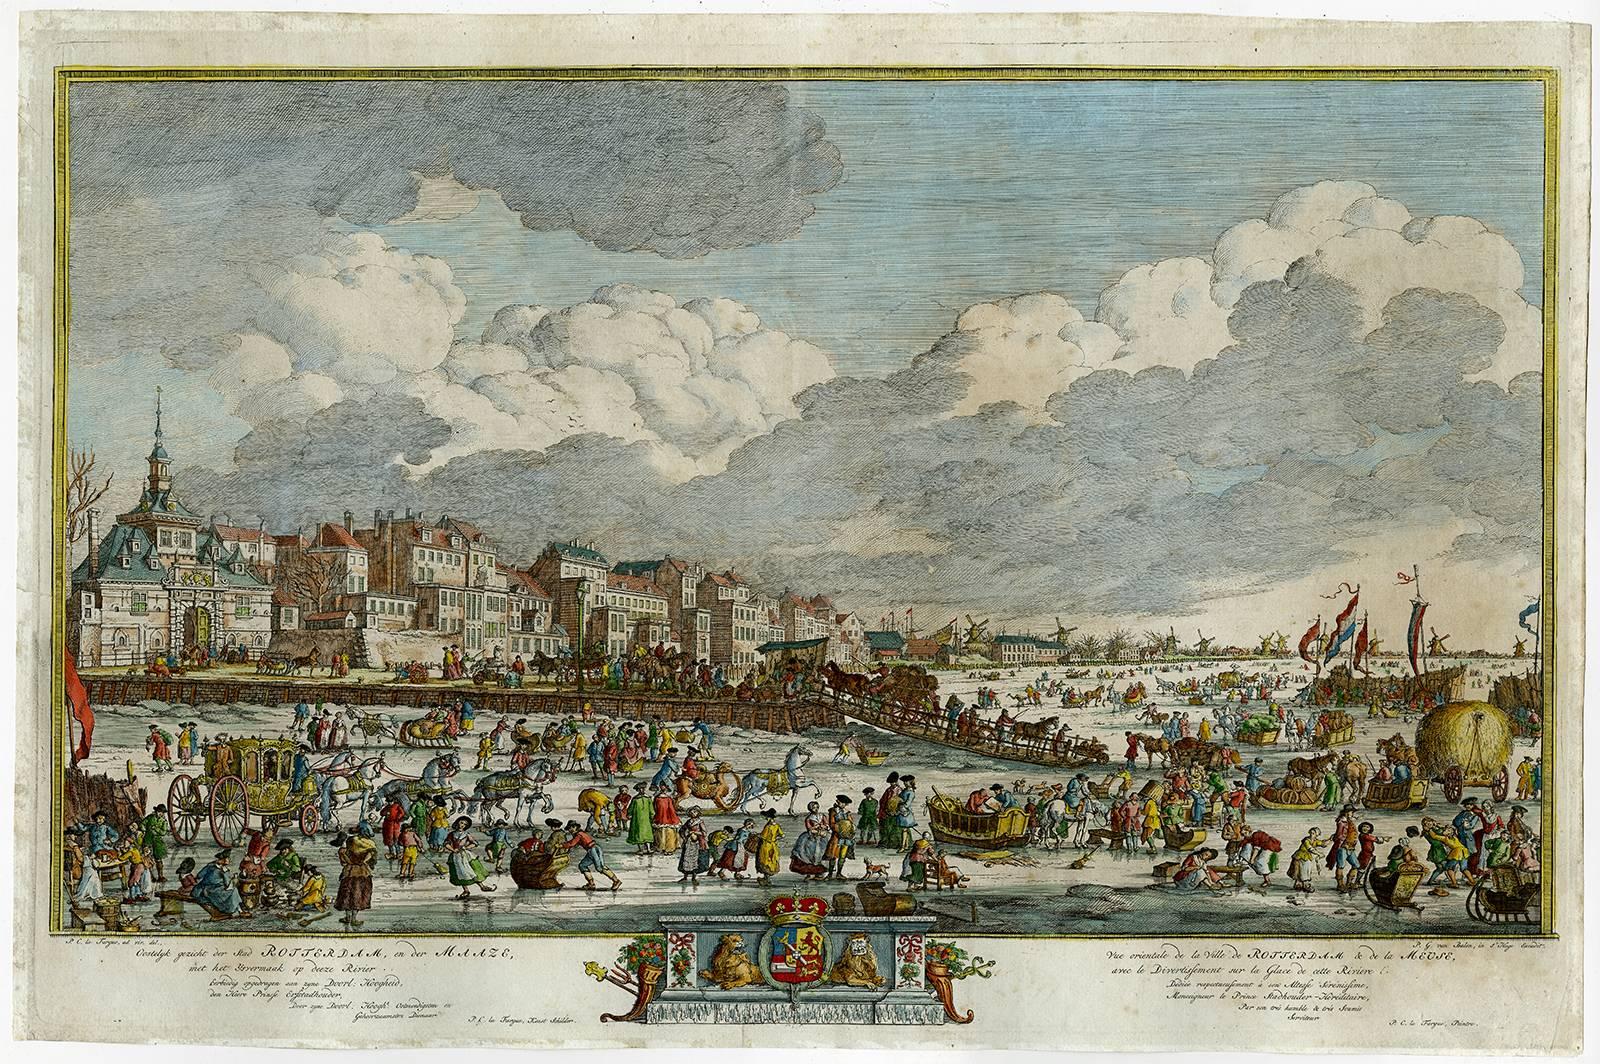 Paulus Constantijn La Fargue Landscape Print - Historical view of Rotterdam with ice skating scenery - Engraving - 18th Century